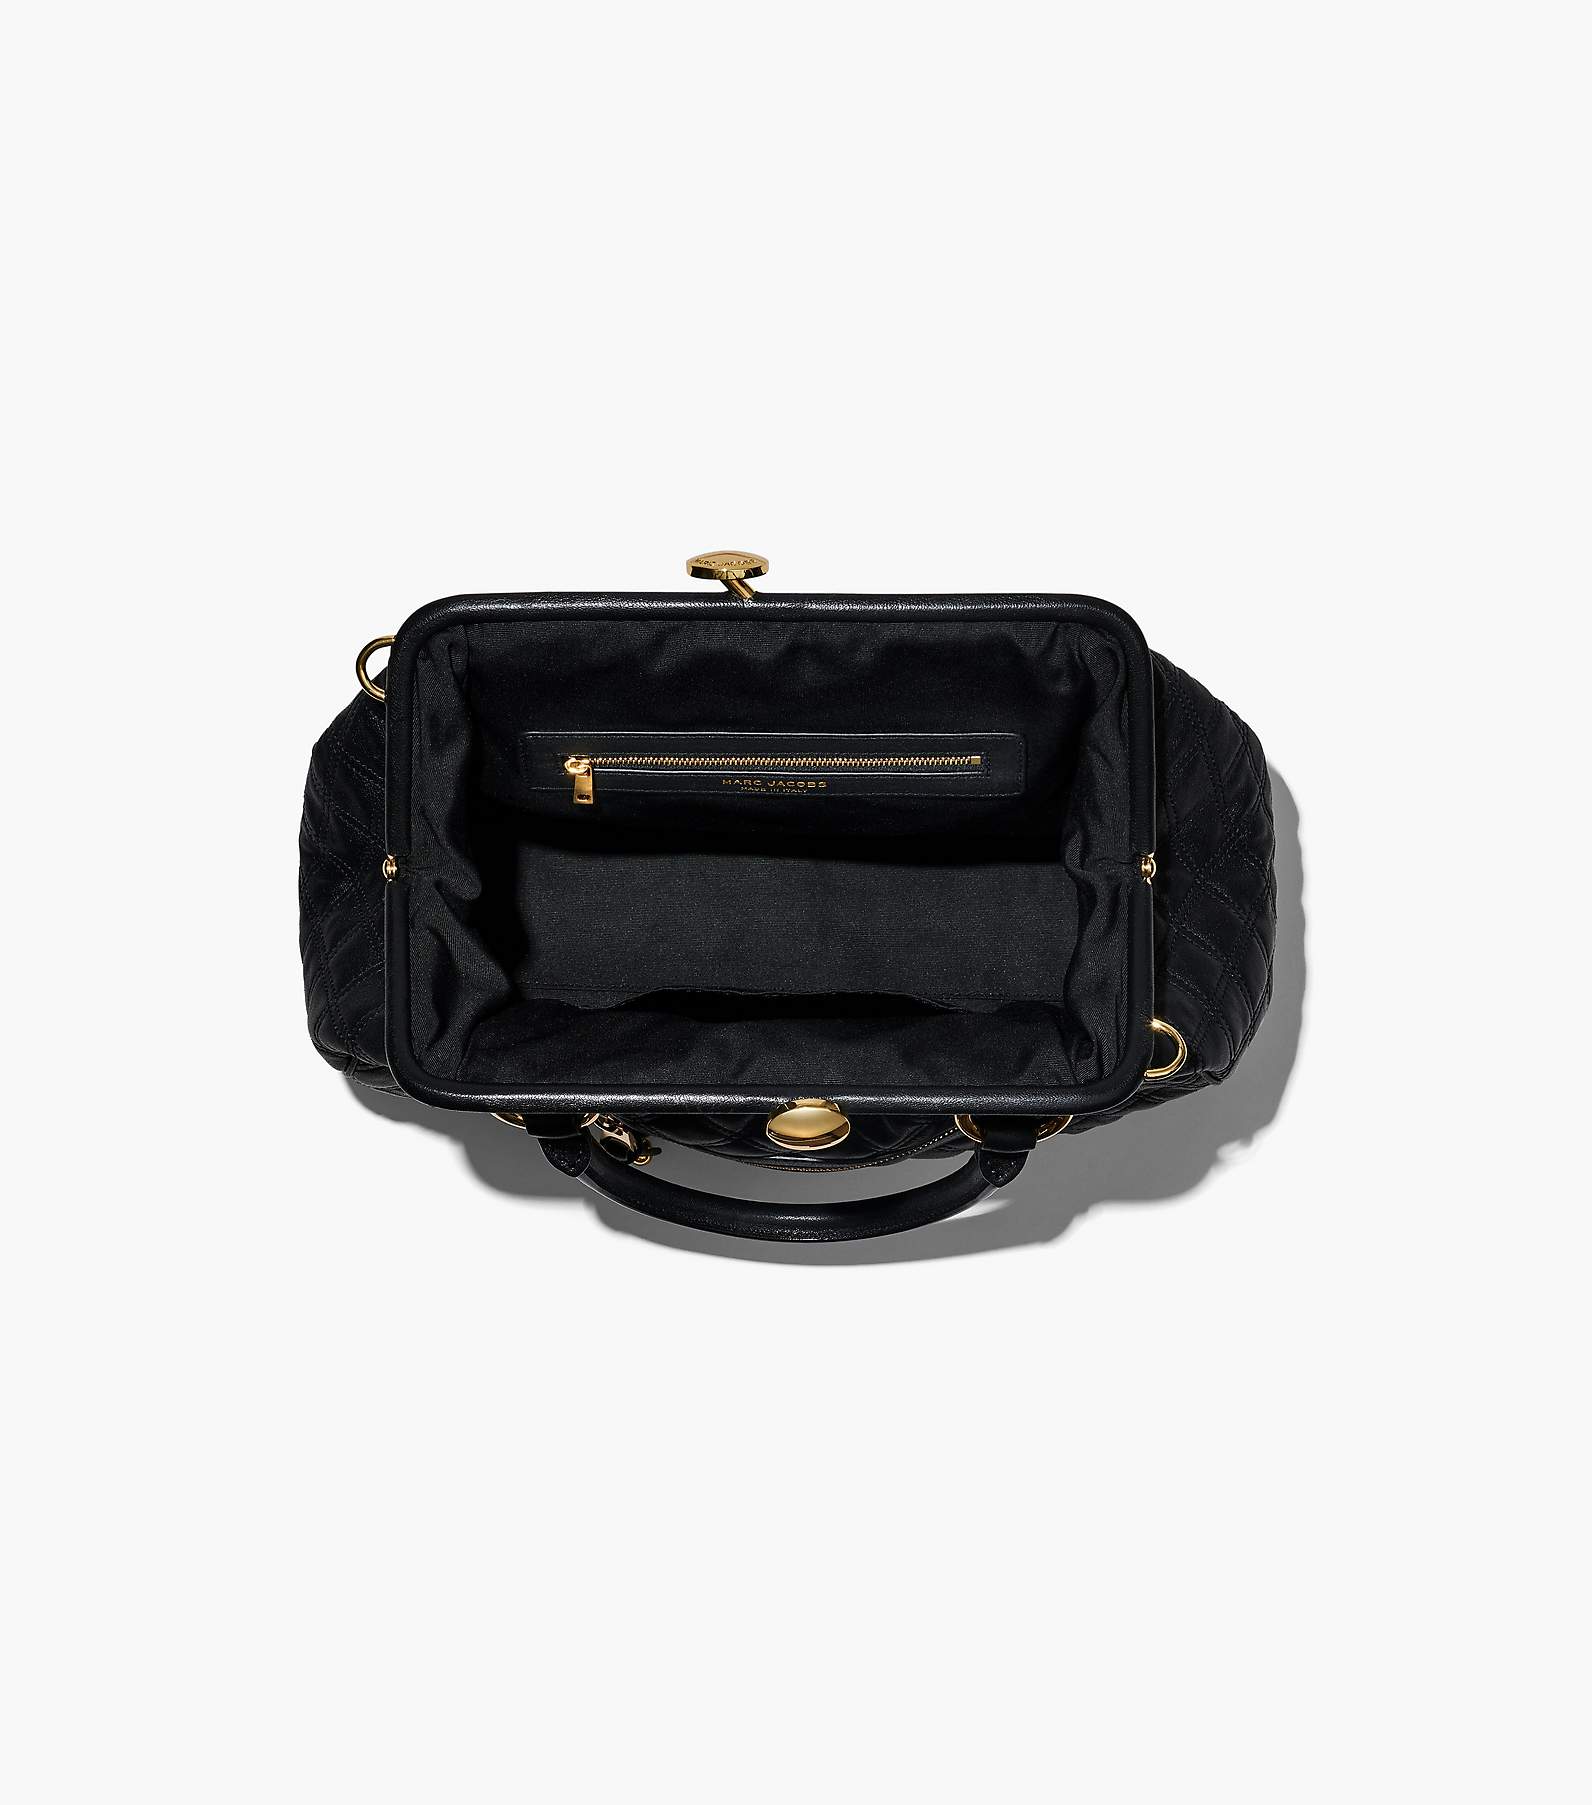 Marc Jacobs Is Bringing Back the Stam Bag With Help From Its